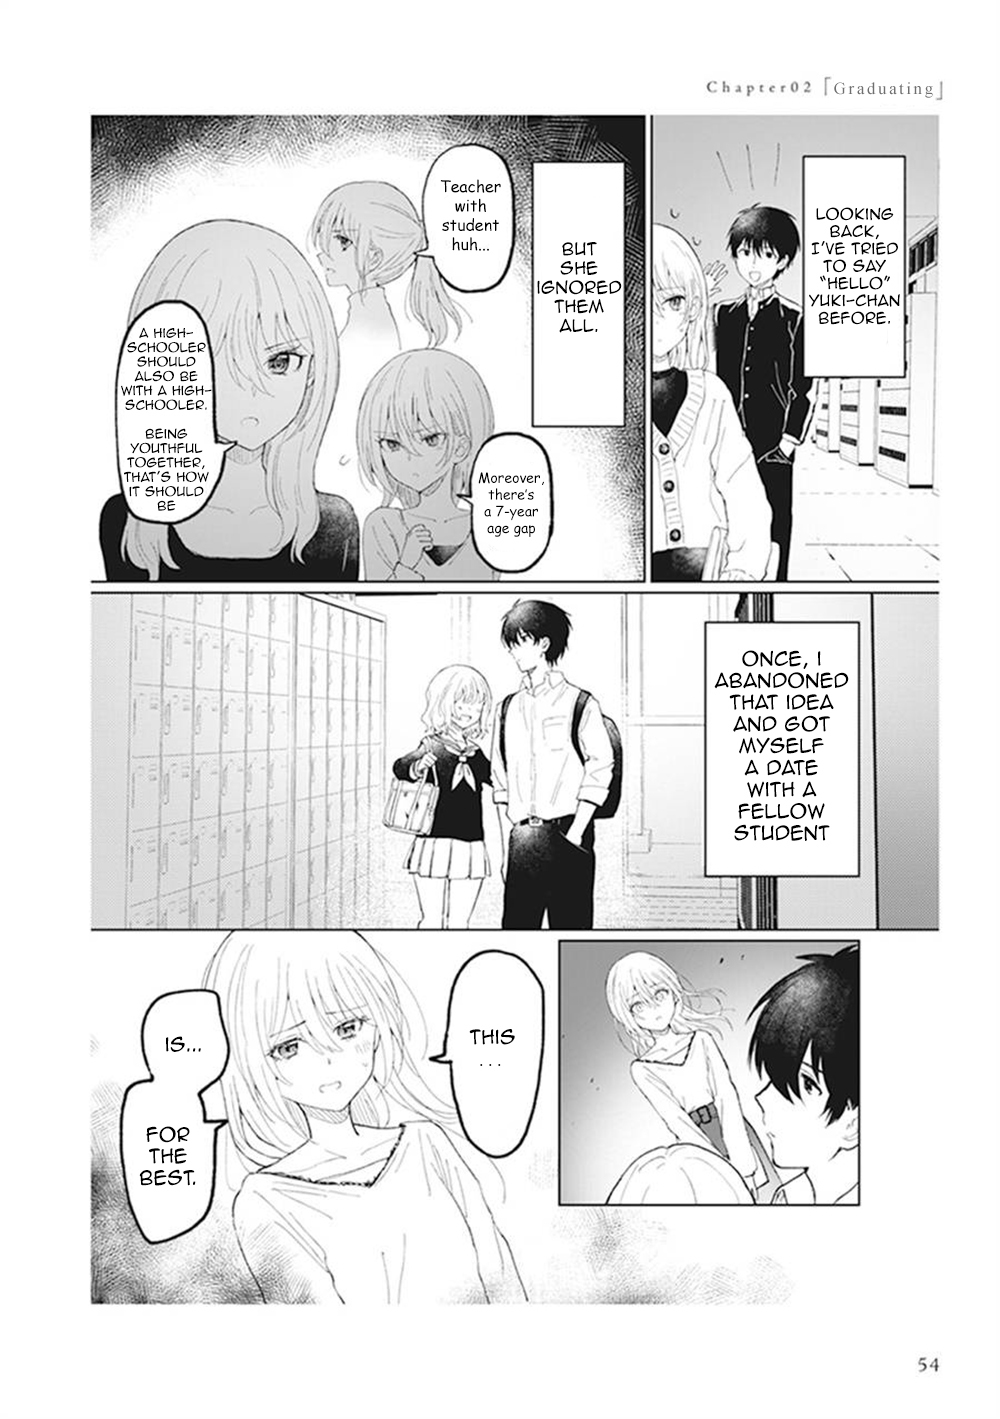 Give You My First Time... vol.1 ch.2.7